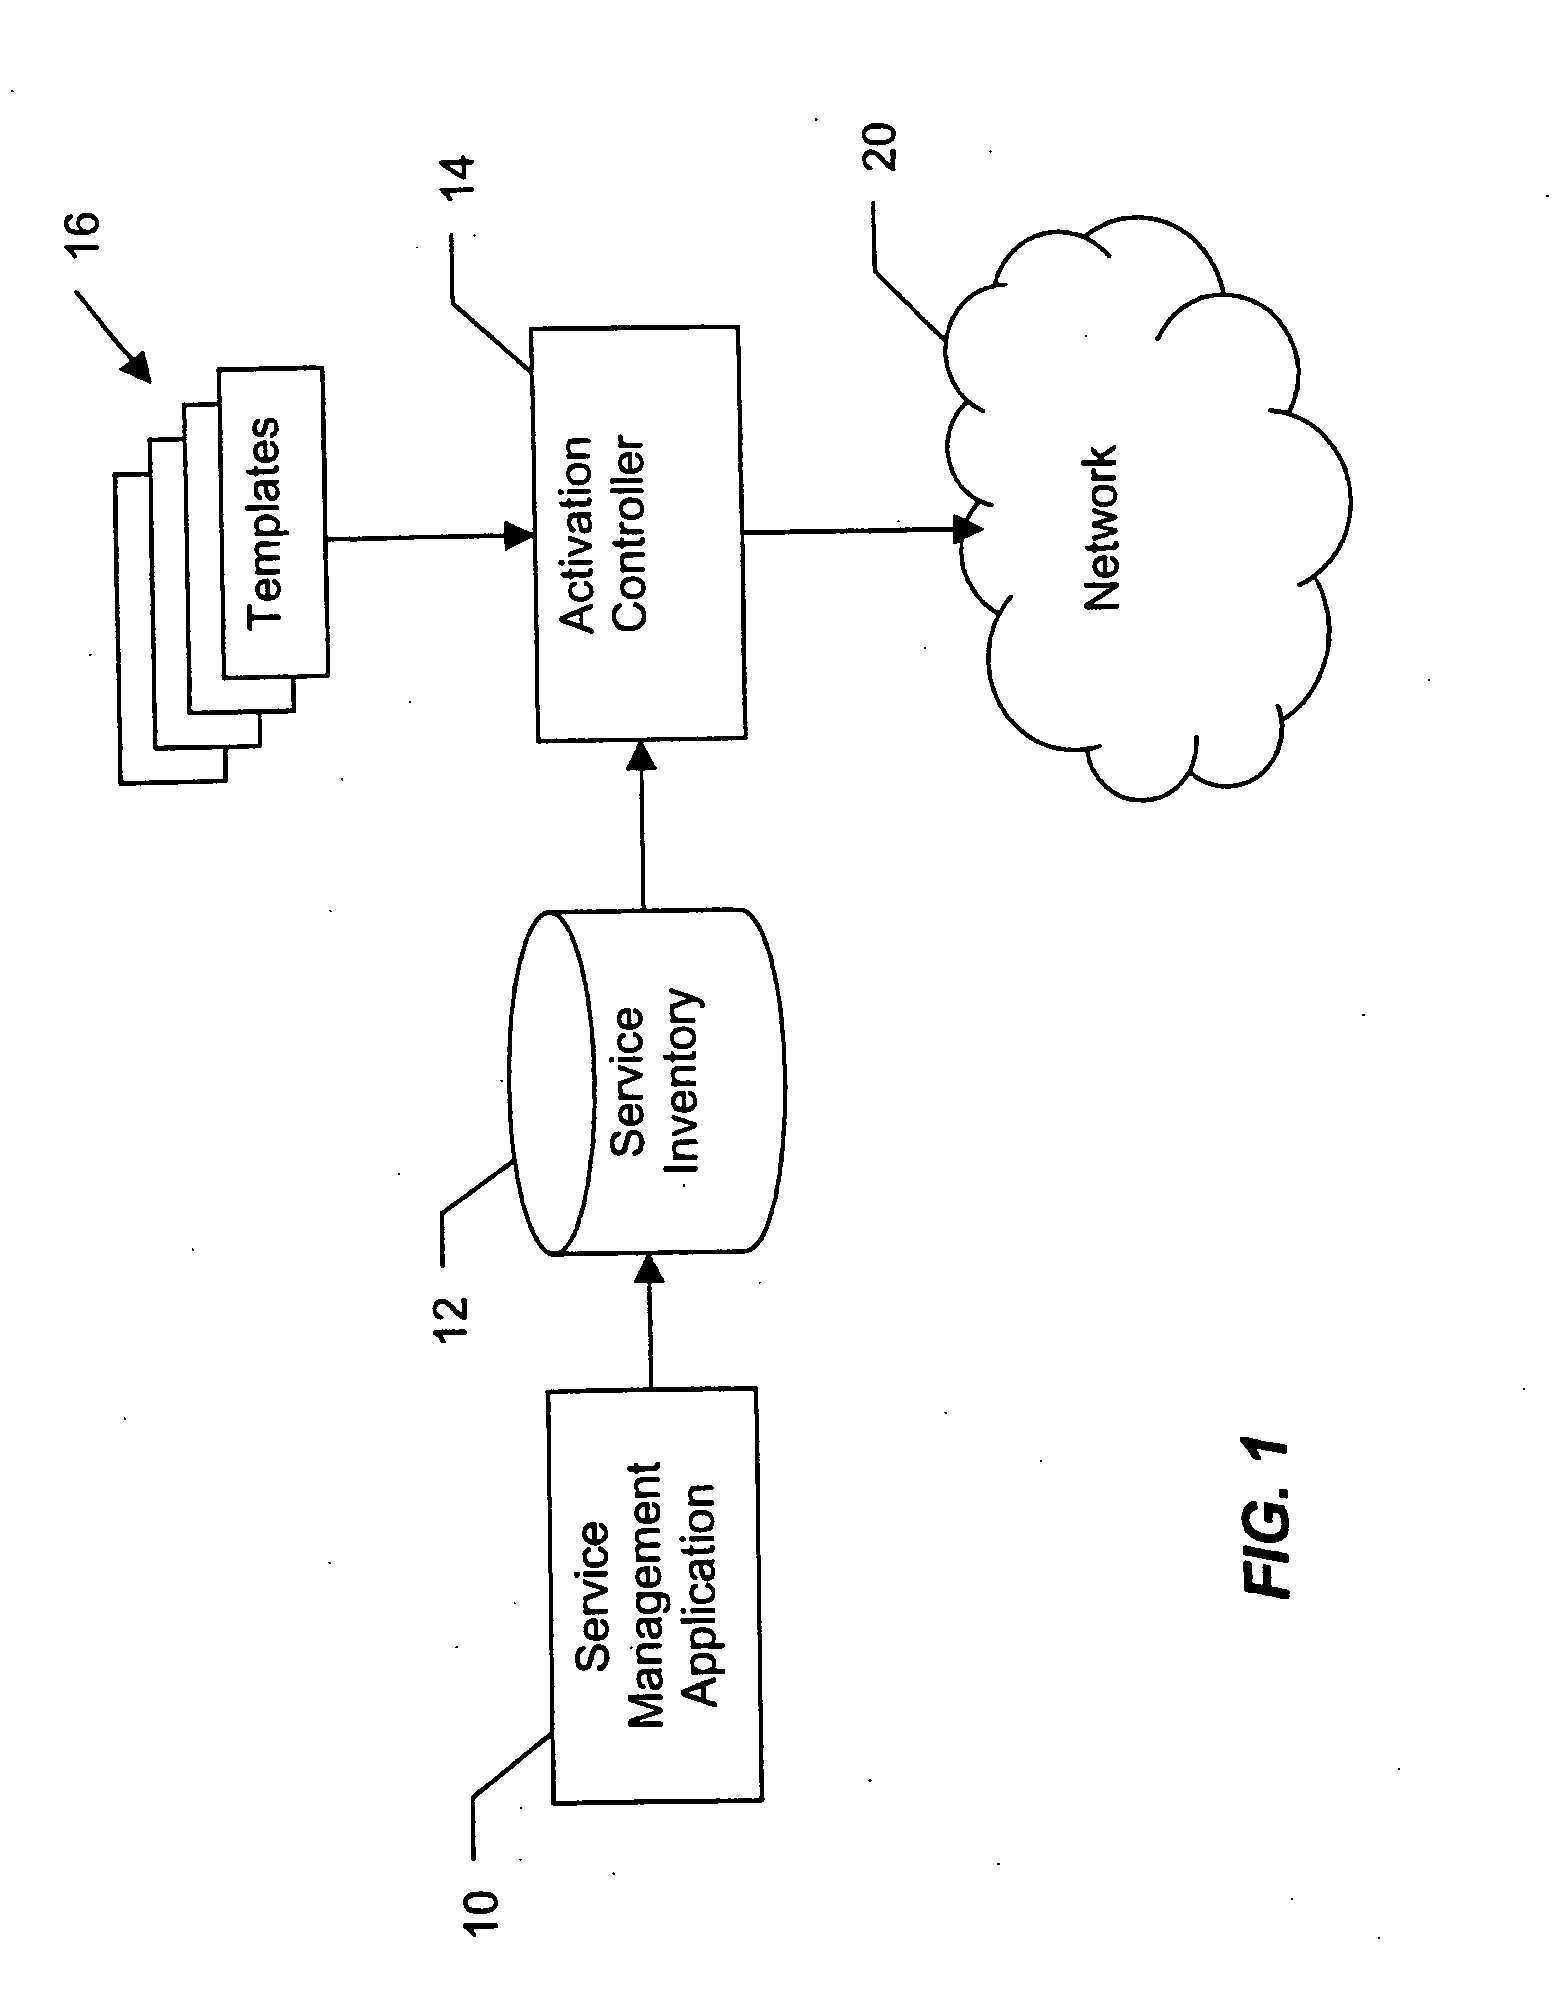 Method of configuring devices in a telecommunications network